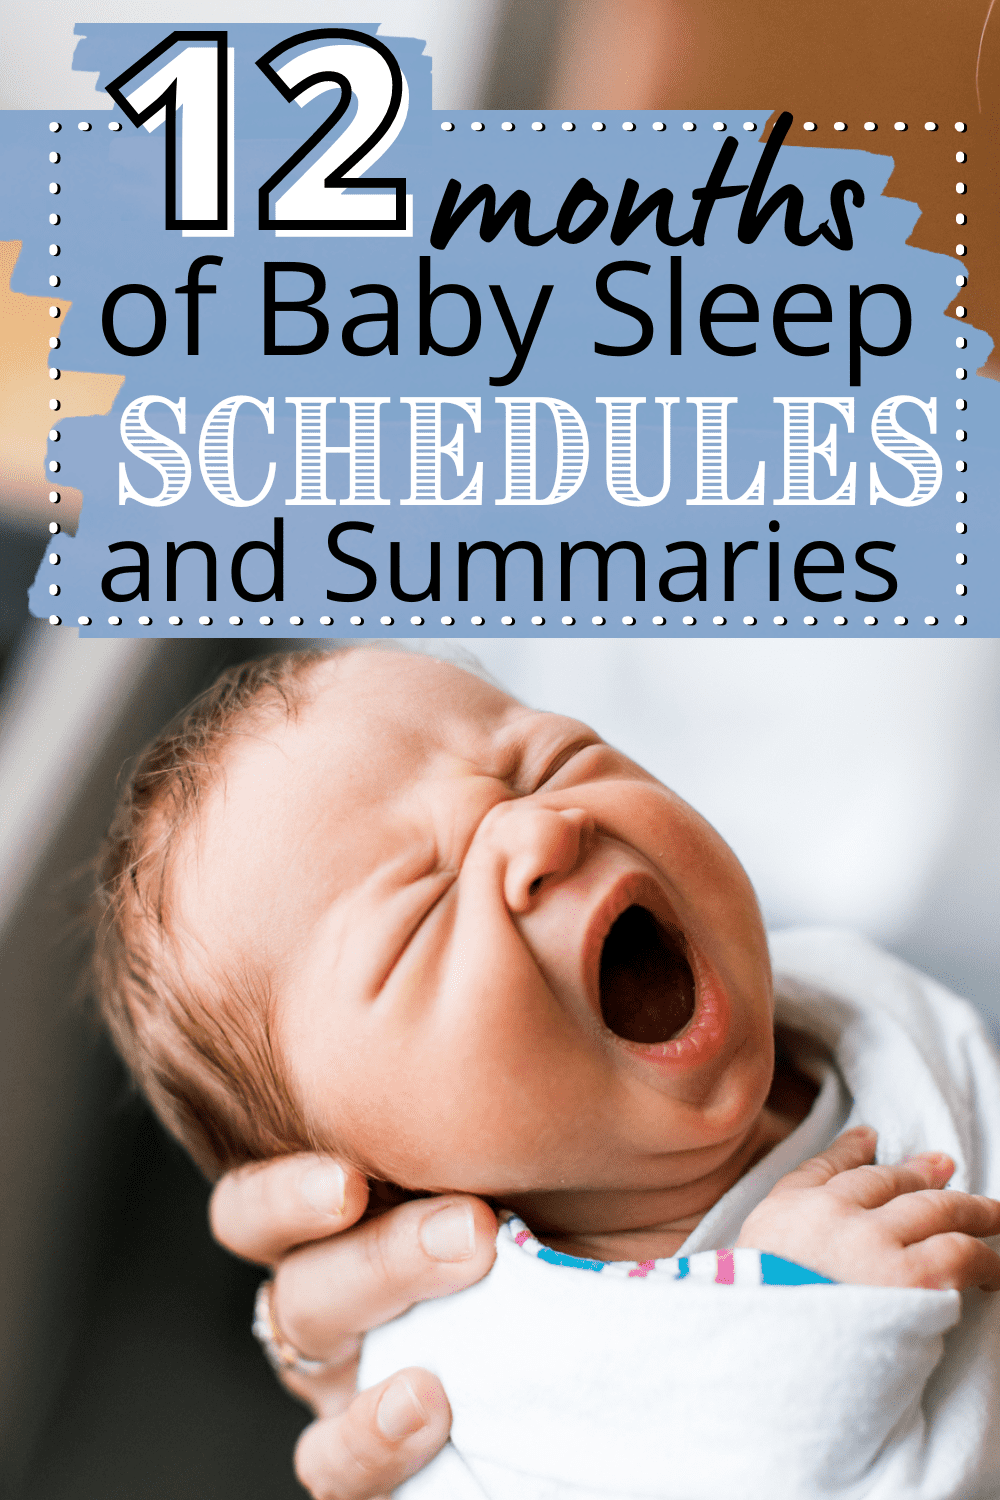 Baby sample schedules in the first year of life. What to expect in the first 12 months of a baby's life: Baby development, milestones, and more!